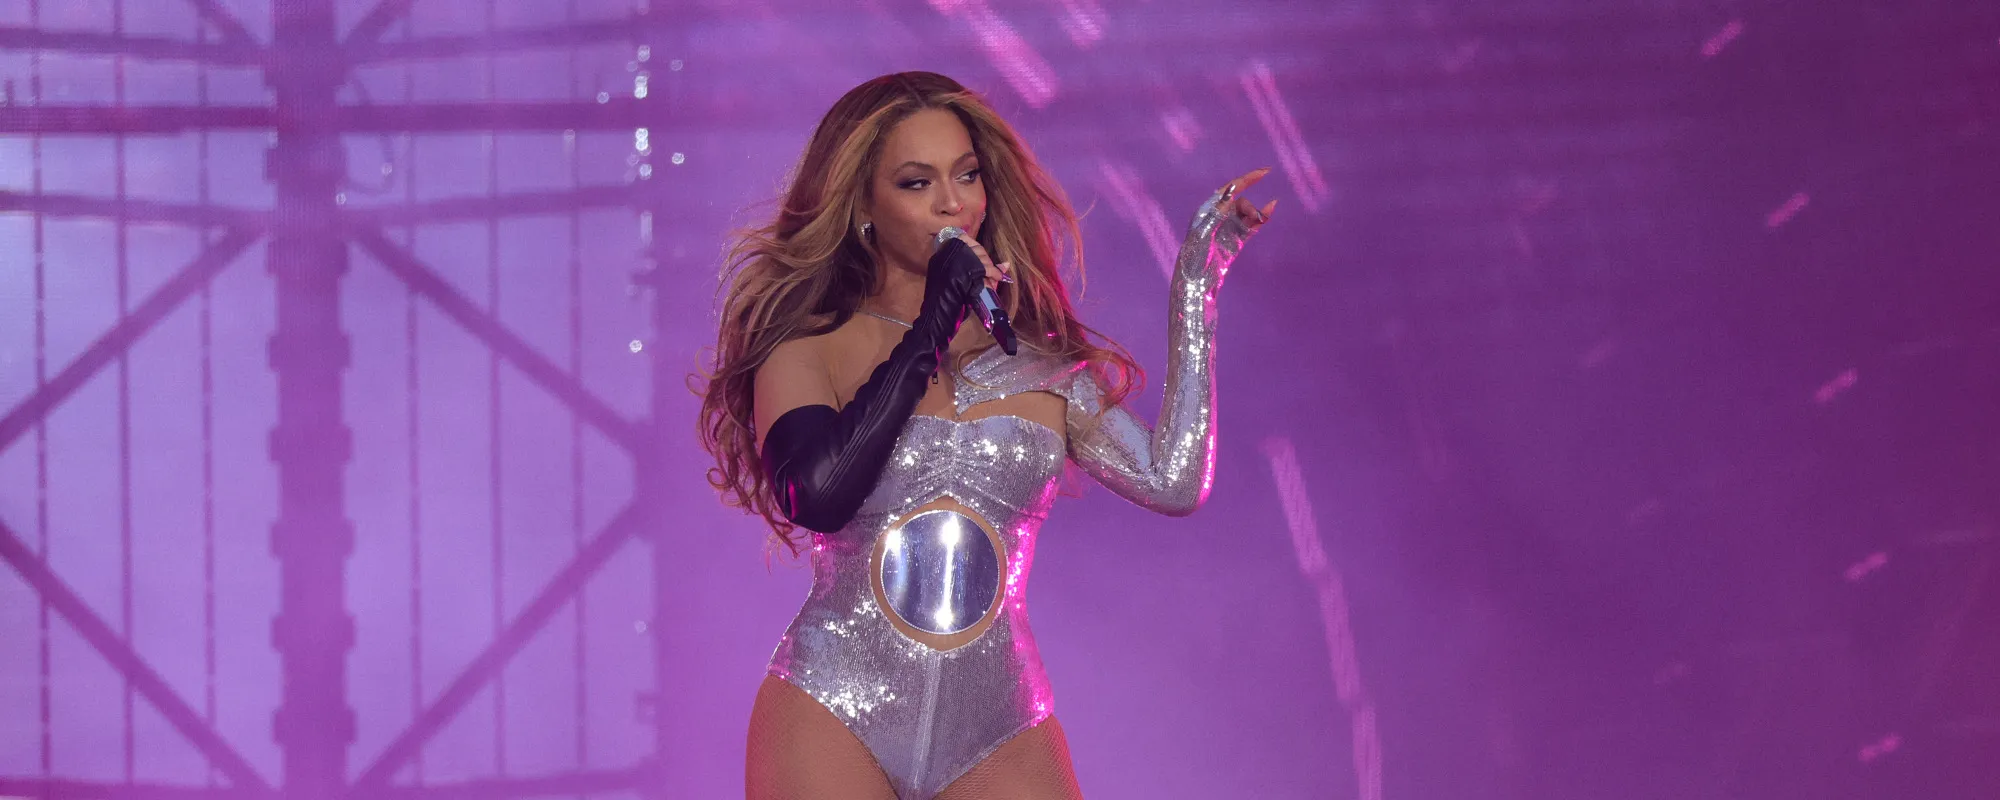 Beyonce’s Renaissance World Tour Is Highest Grossing of Any R&B Artist